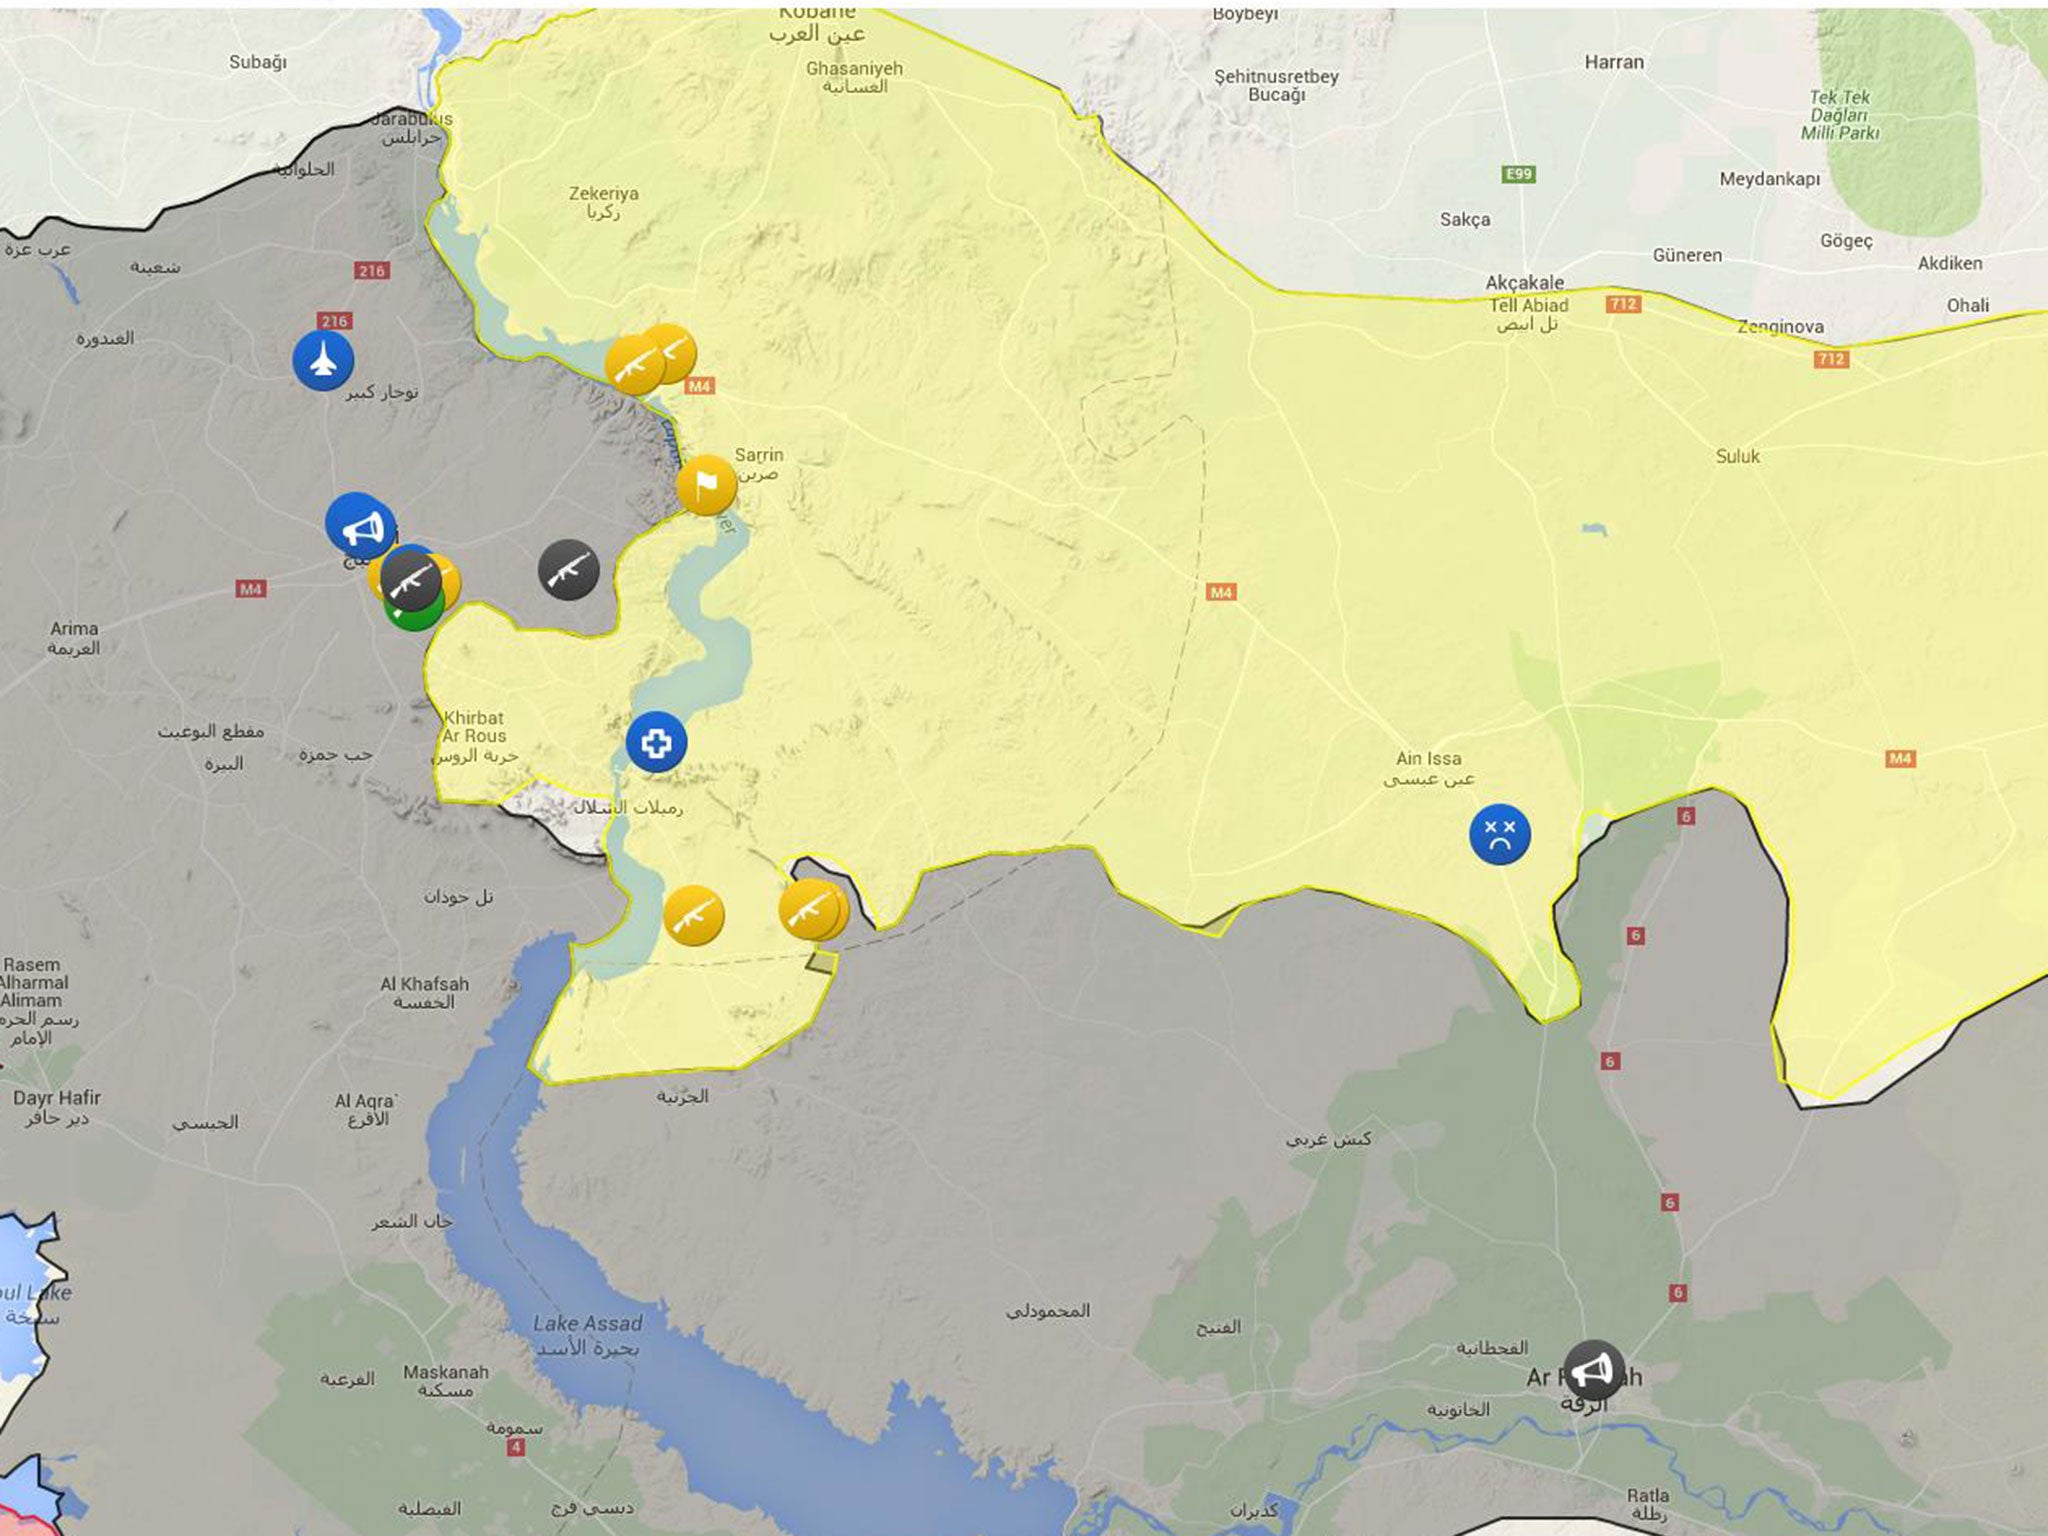 The predominantly Kurdish Syrian Democratic Forces (yellow) offensive against Isis territory (black) near Manbij seen on 1 June 2016.